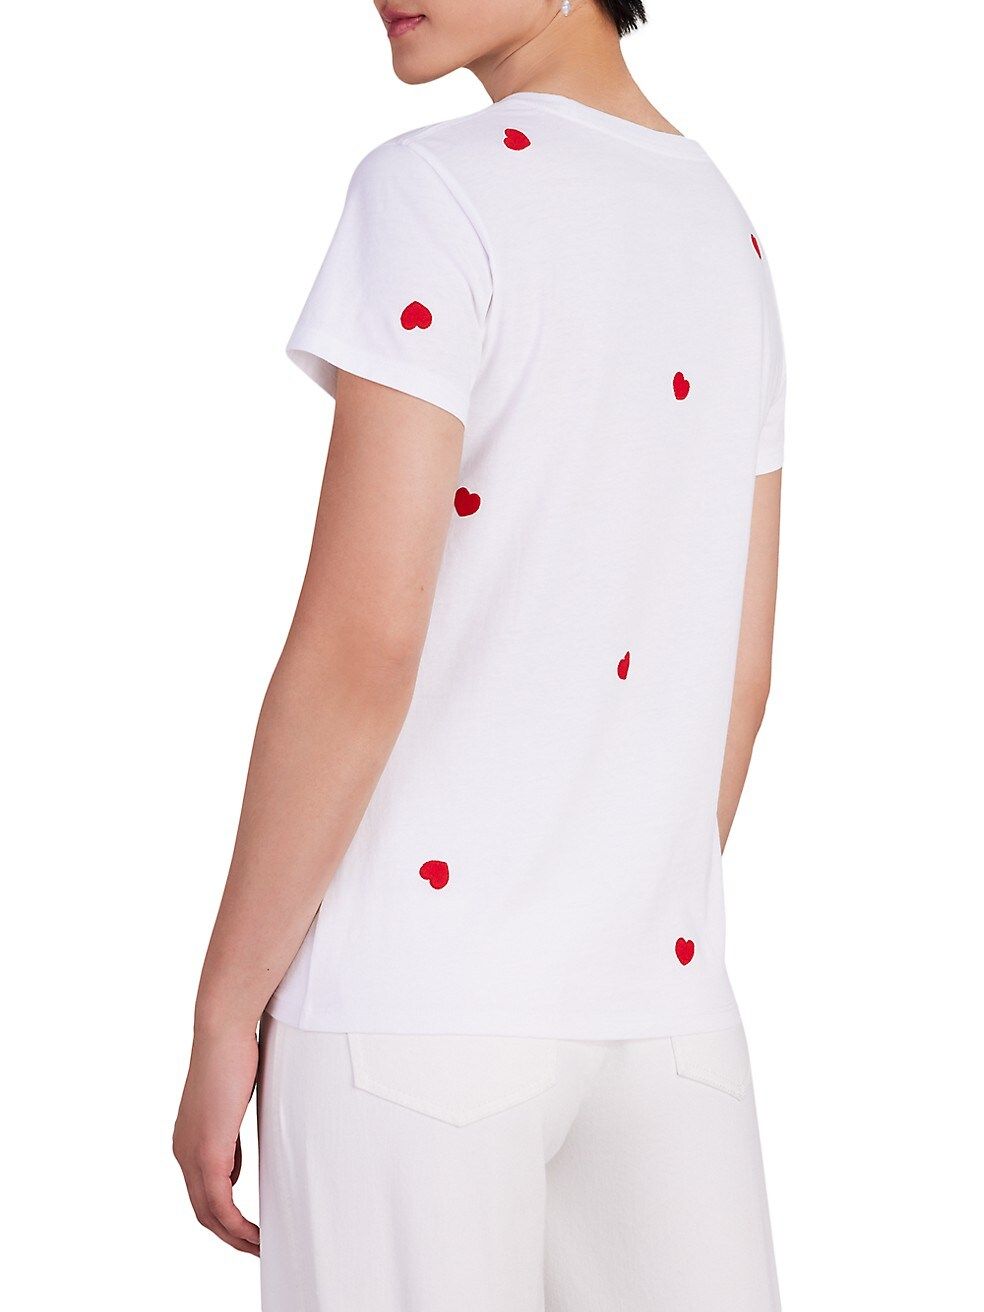 kate spade new york Embroidered Heart Cotton Pullover Tee | Saks Fifth Avenue